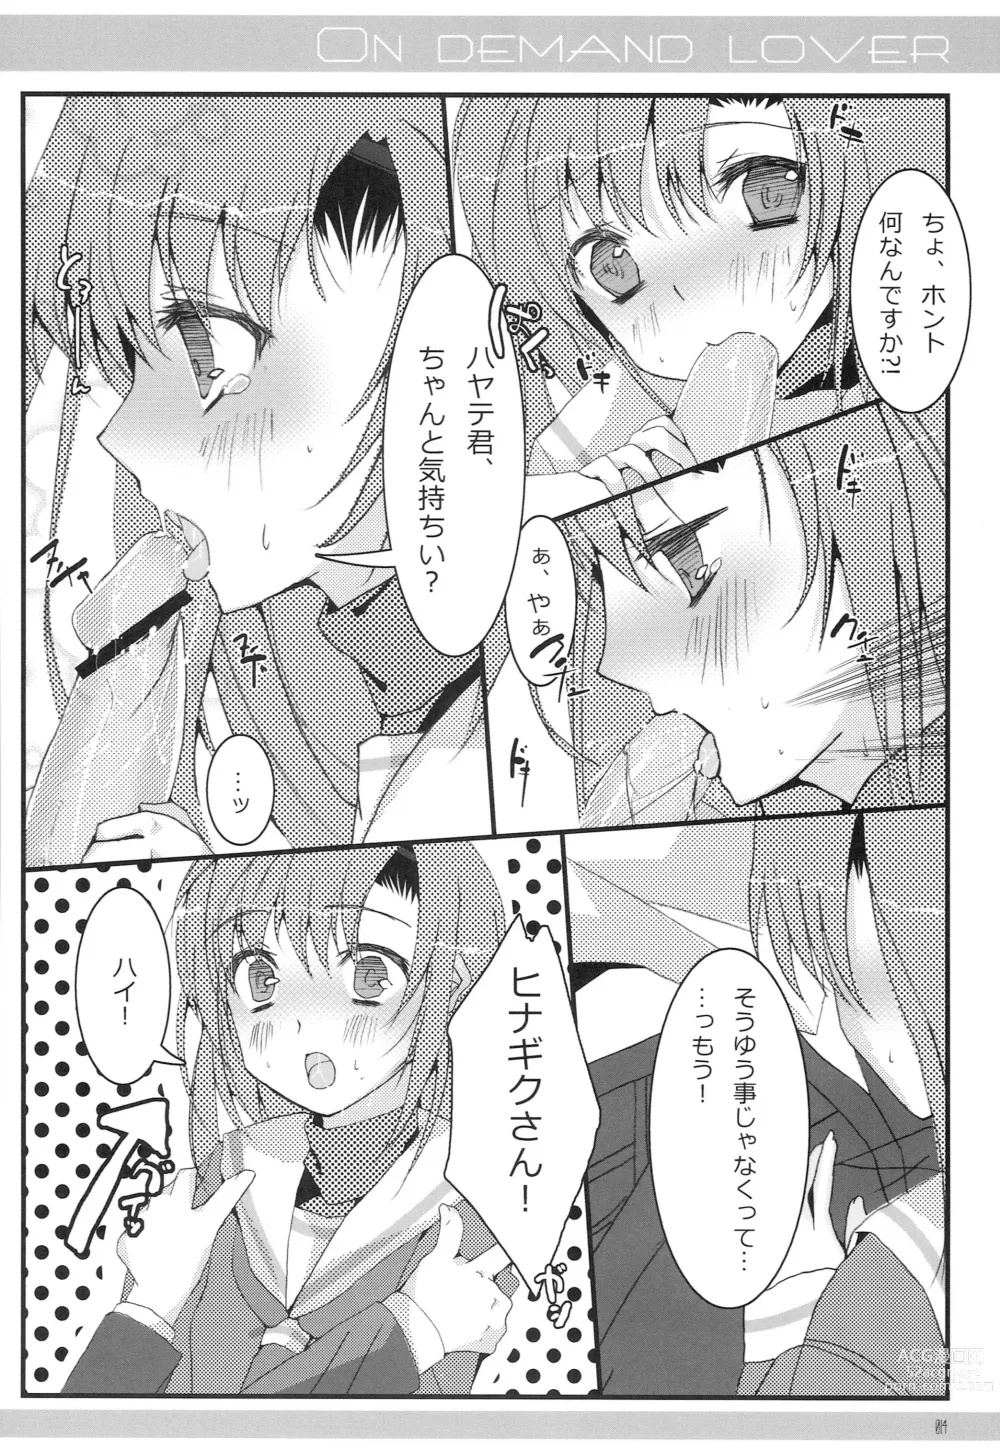 Page 12 of doujinshi ON DEMAND LOVER